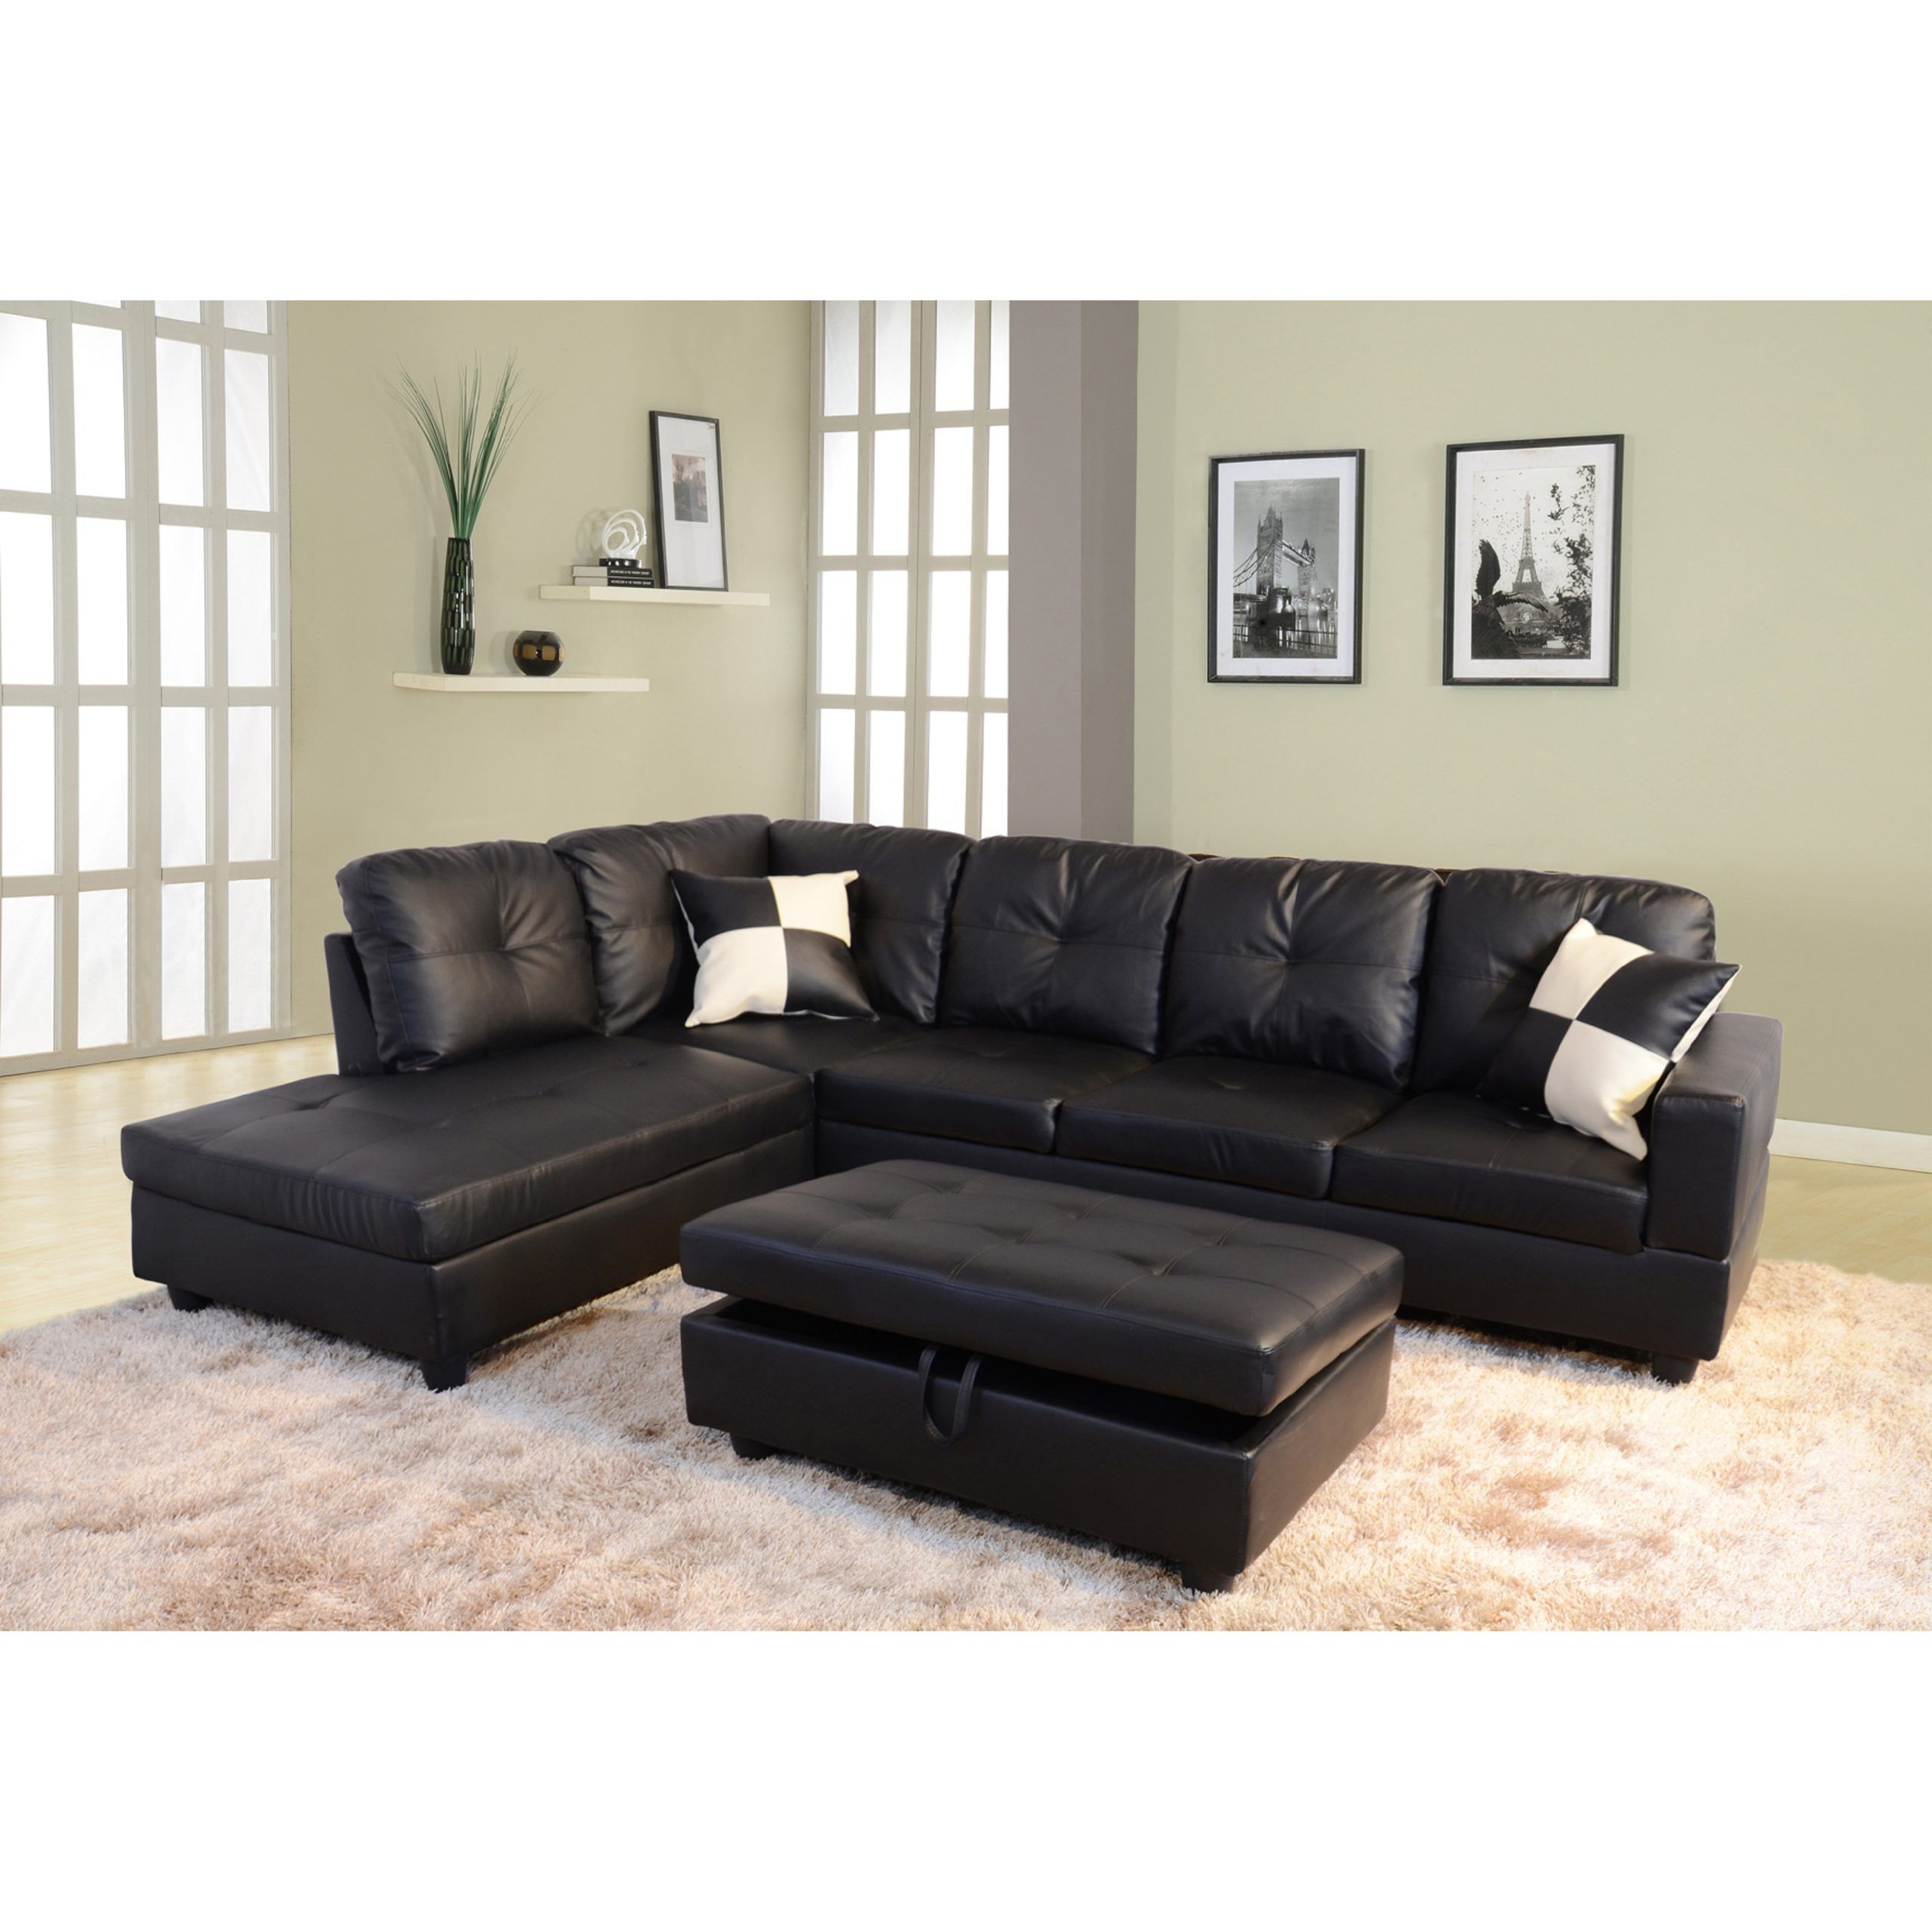 3 Pieces Sectional Sofa Set,left Facing Black(091a) – On Sale – Bed Bath &  Beyond – 33560697 Inside 3 Piece Leather Sectional Sofa Sets (View 11 of 15)